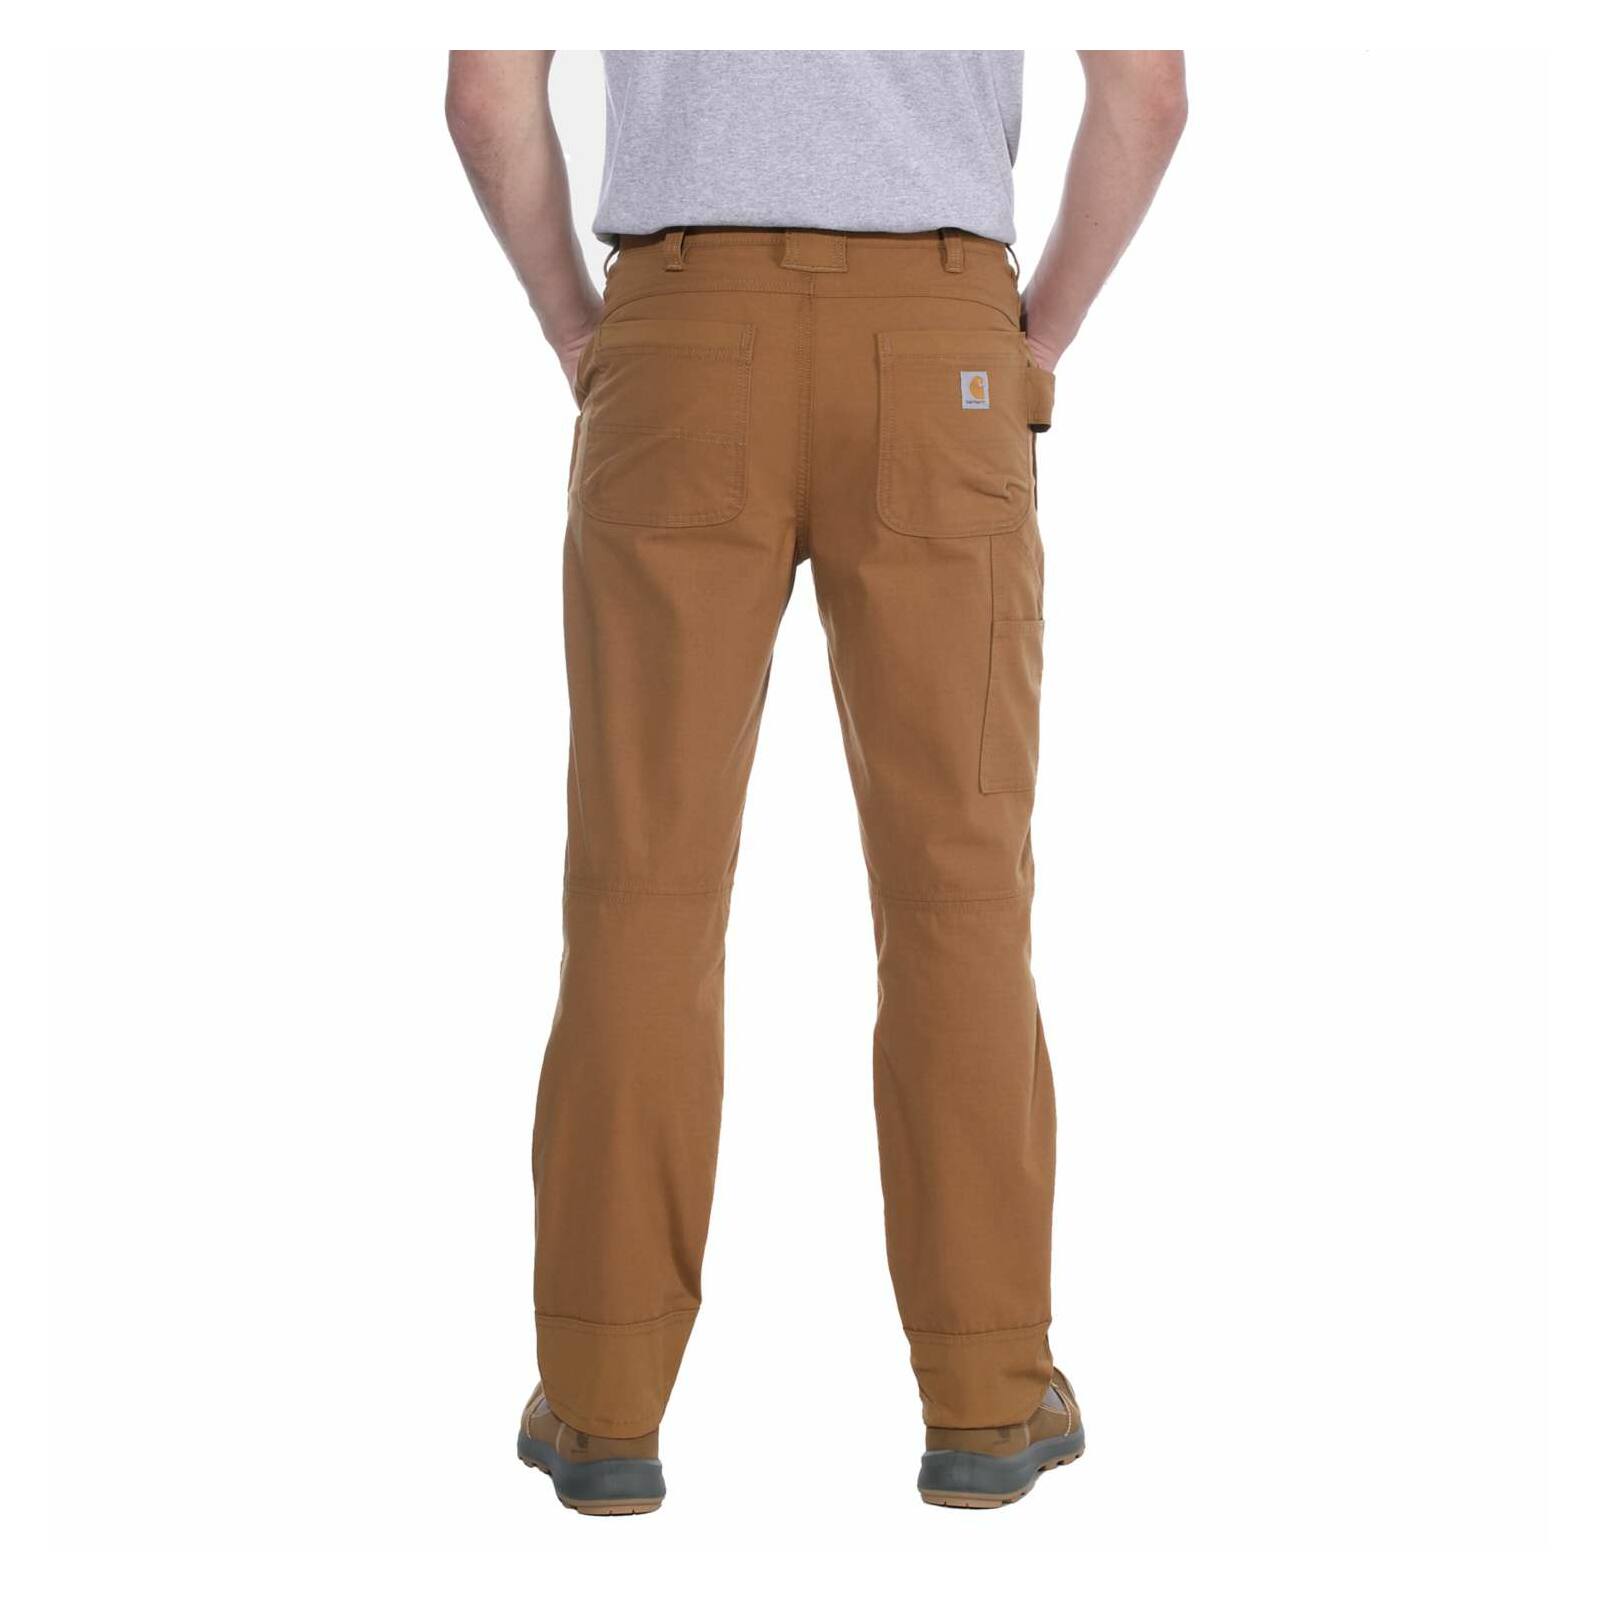 Carhartt Steel Double Front Pant - Roadieworks.com - Online shop for ...